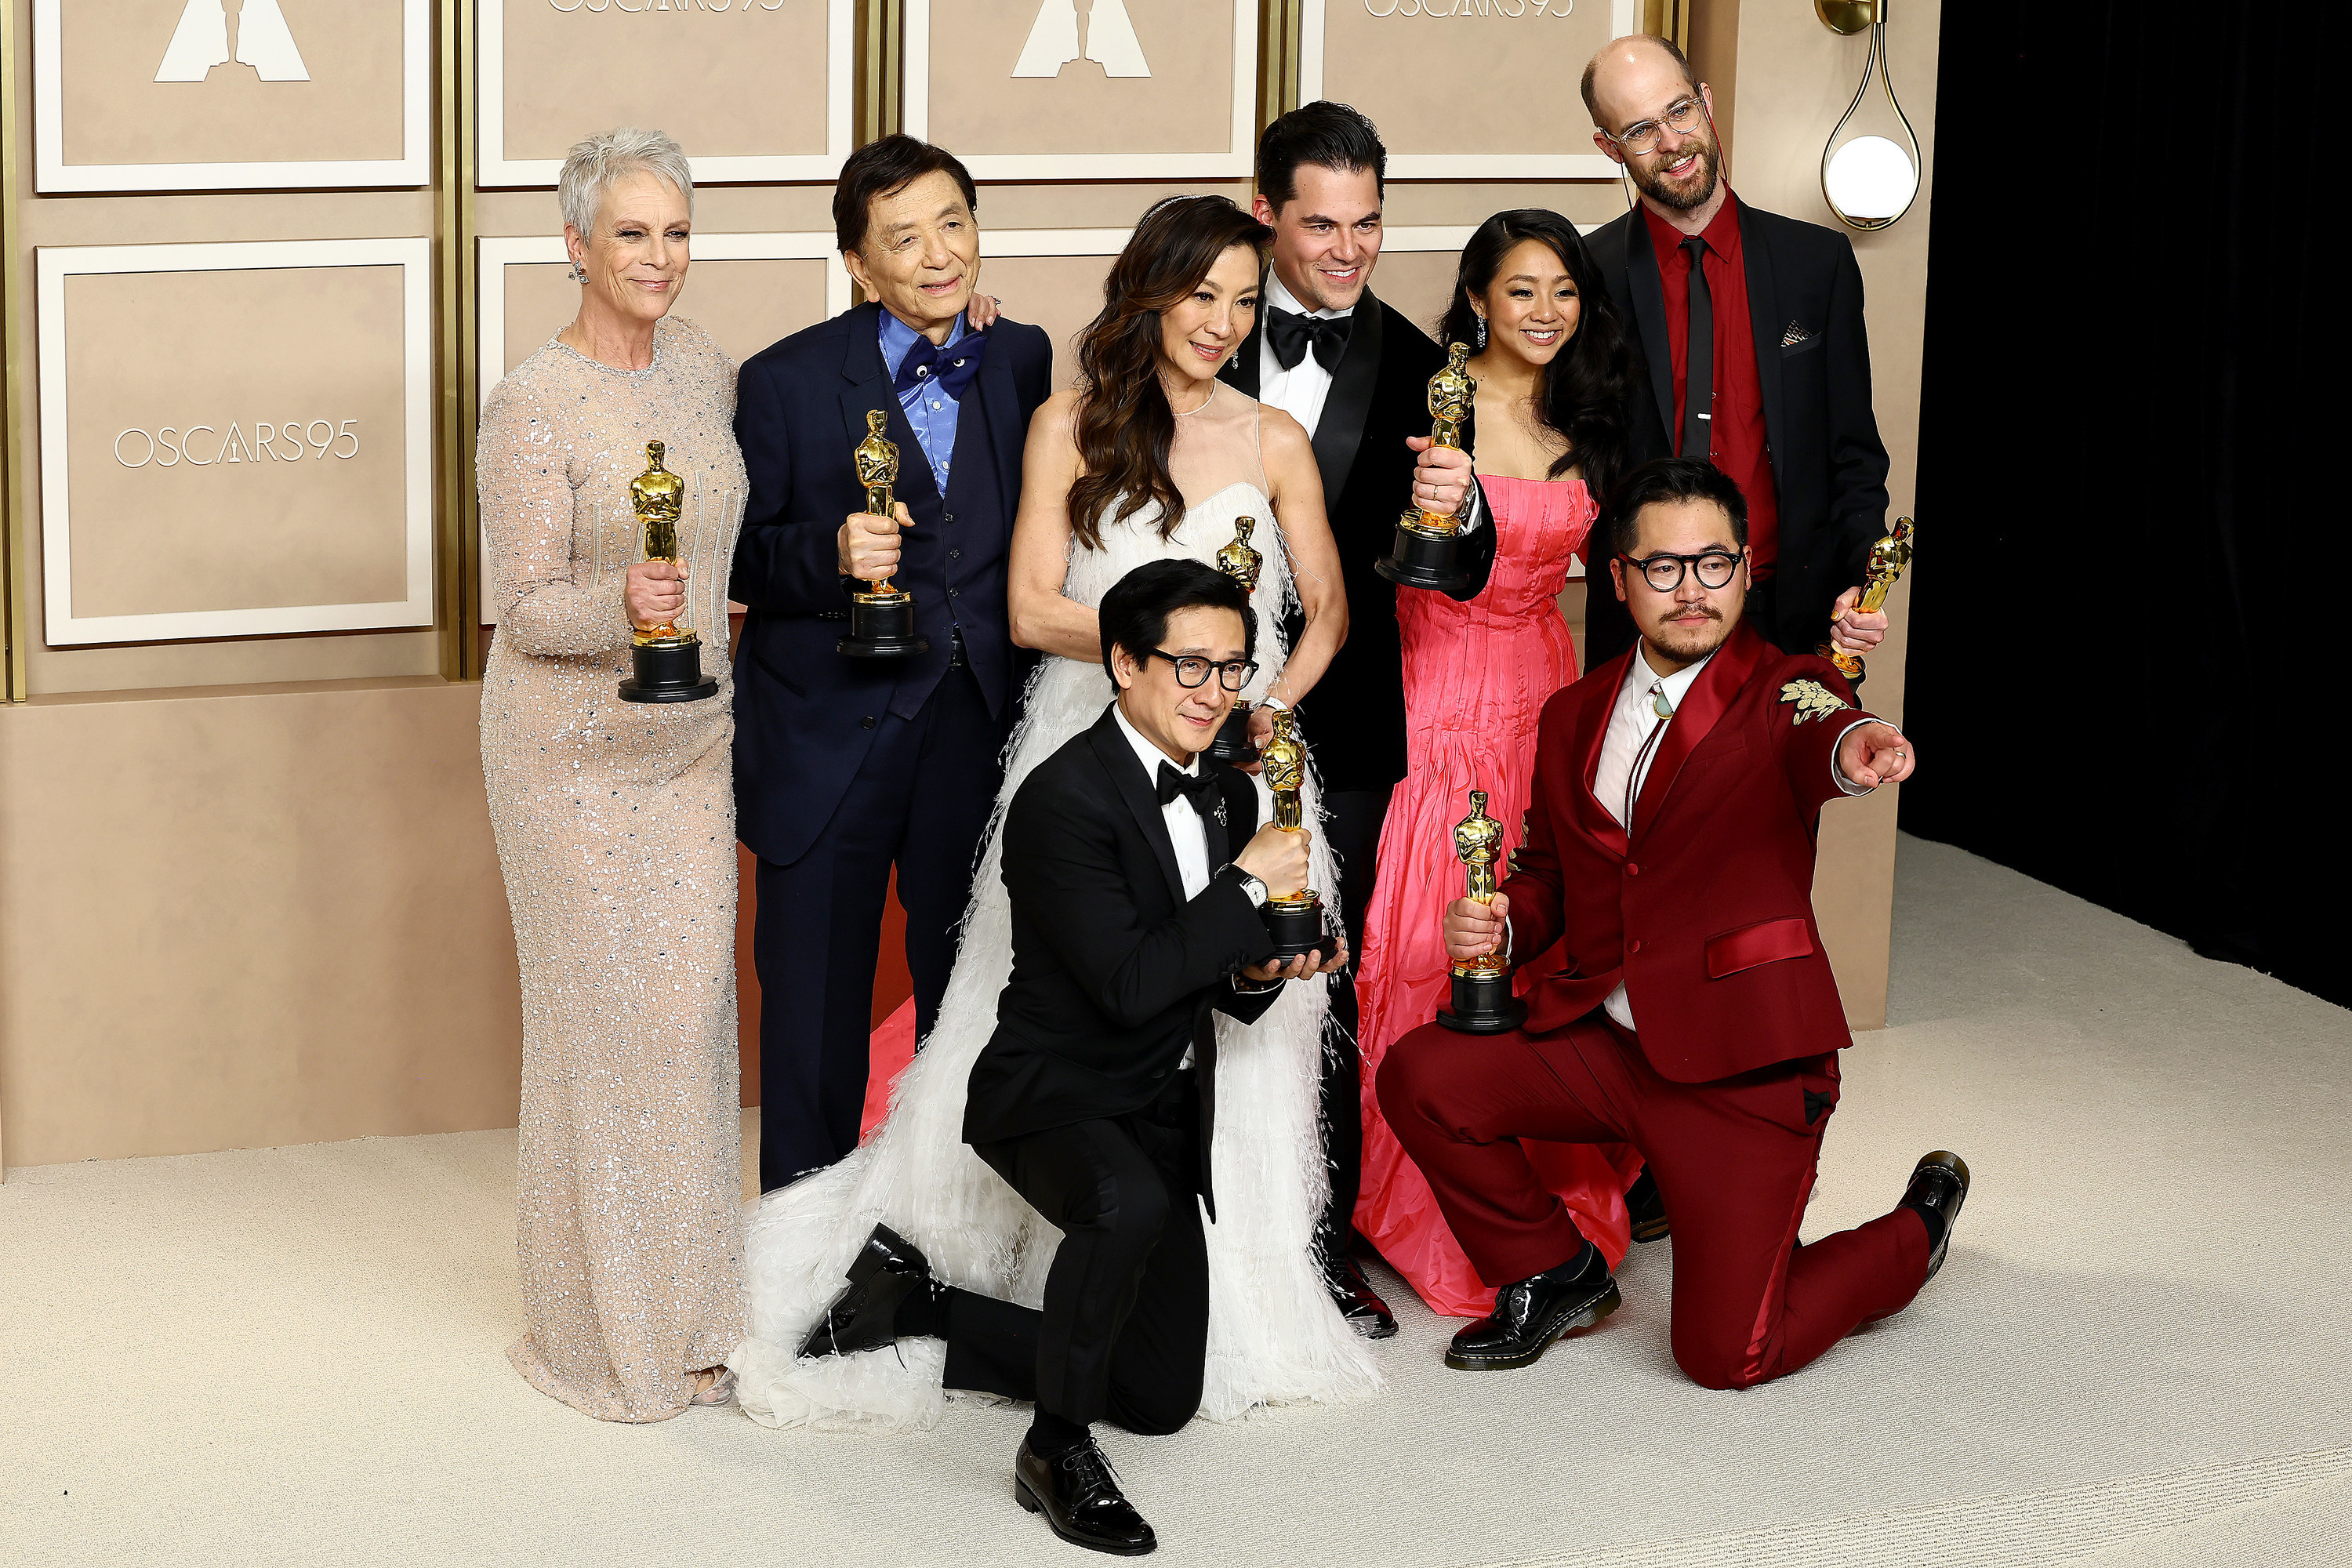 Jamie poses with the cast of her film and their Oscars